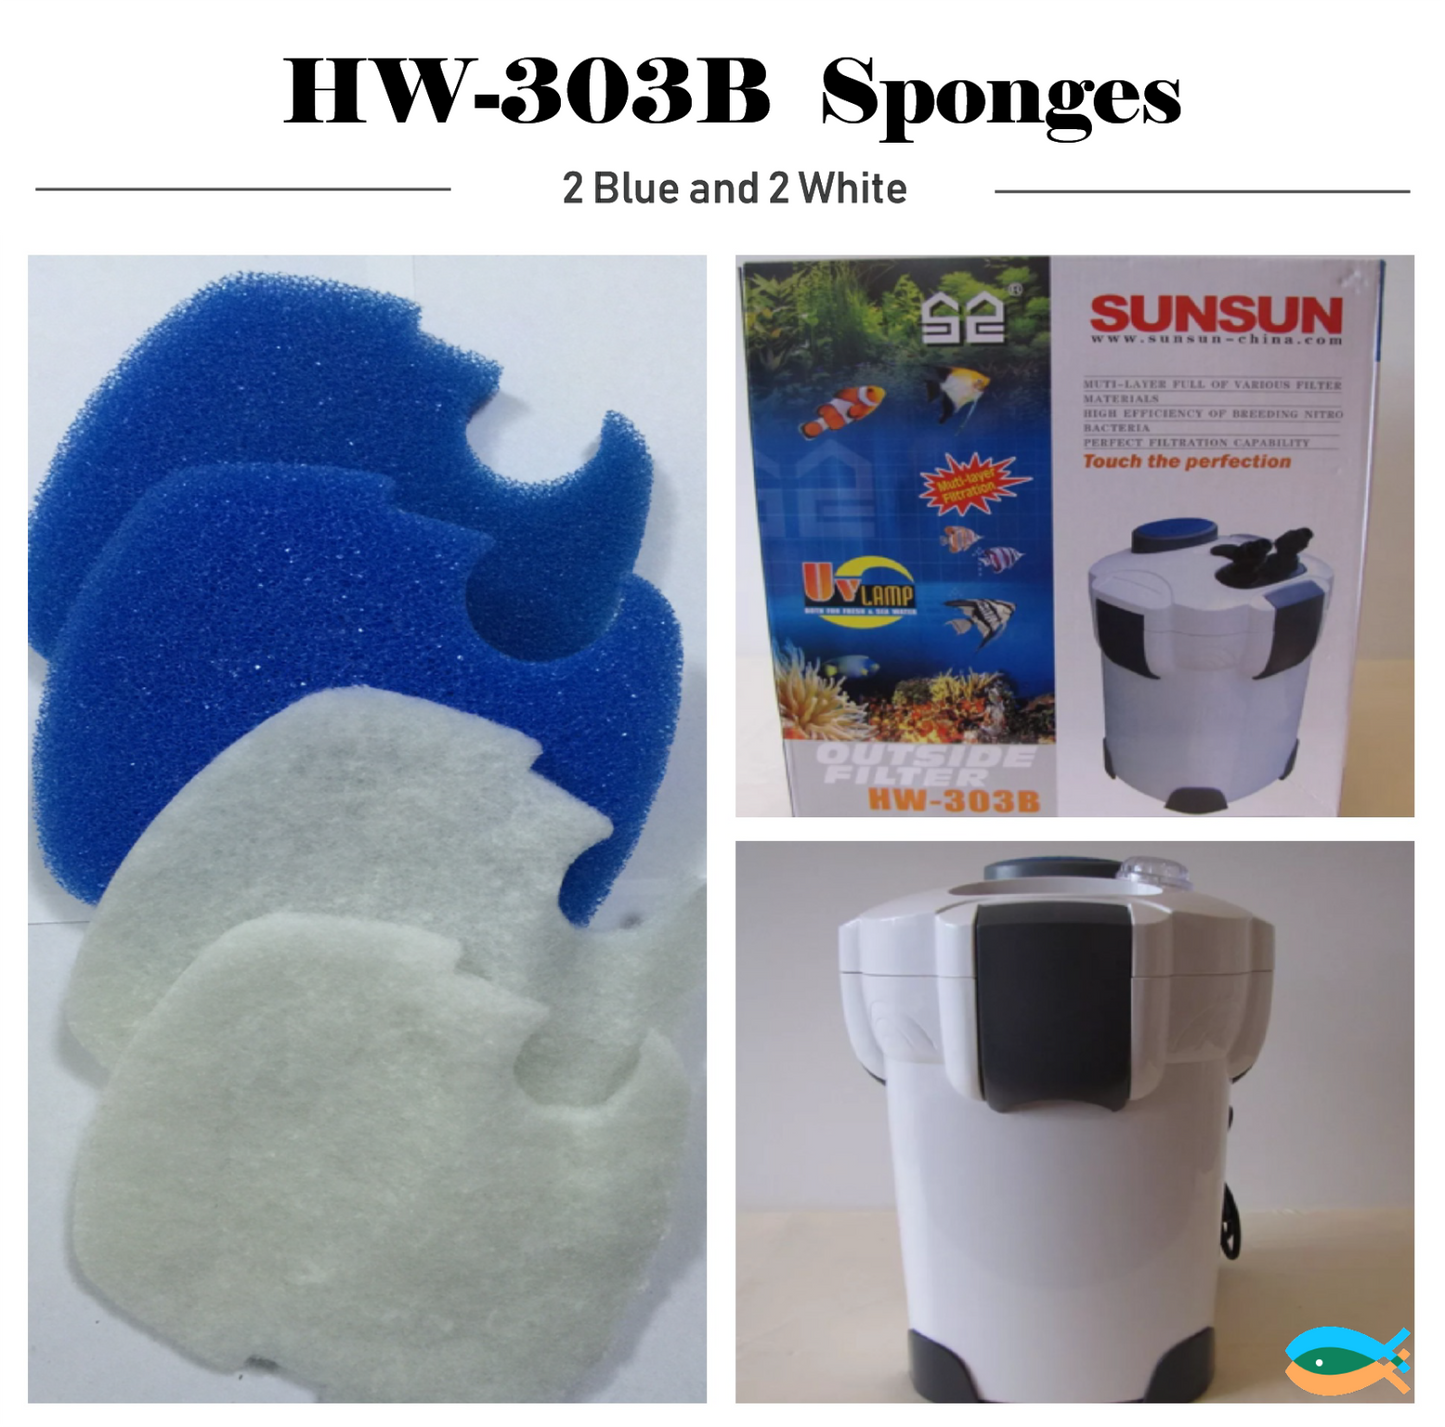 SUNSUN 4PCS genuine replacement sponge pad for all brand with the model number XXX-303